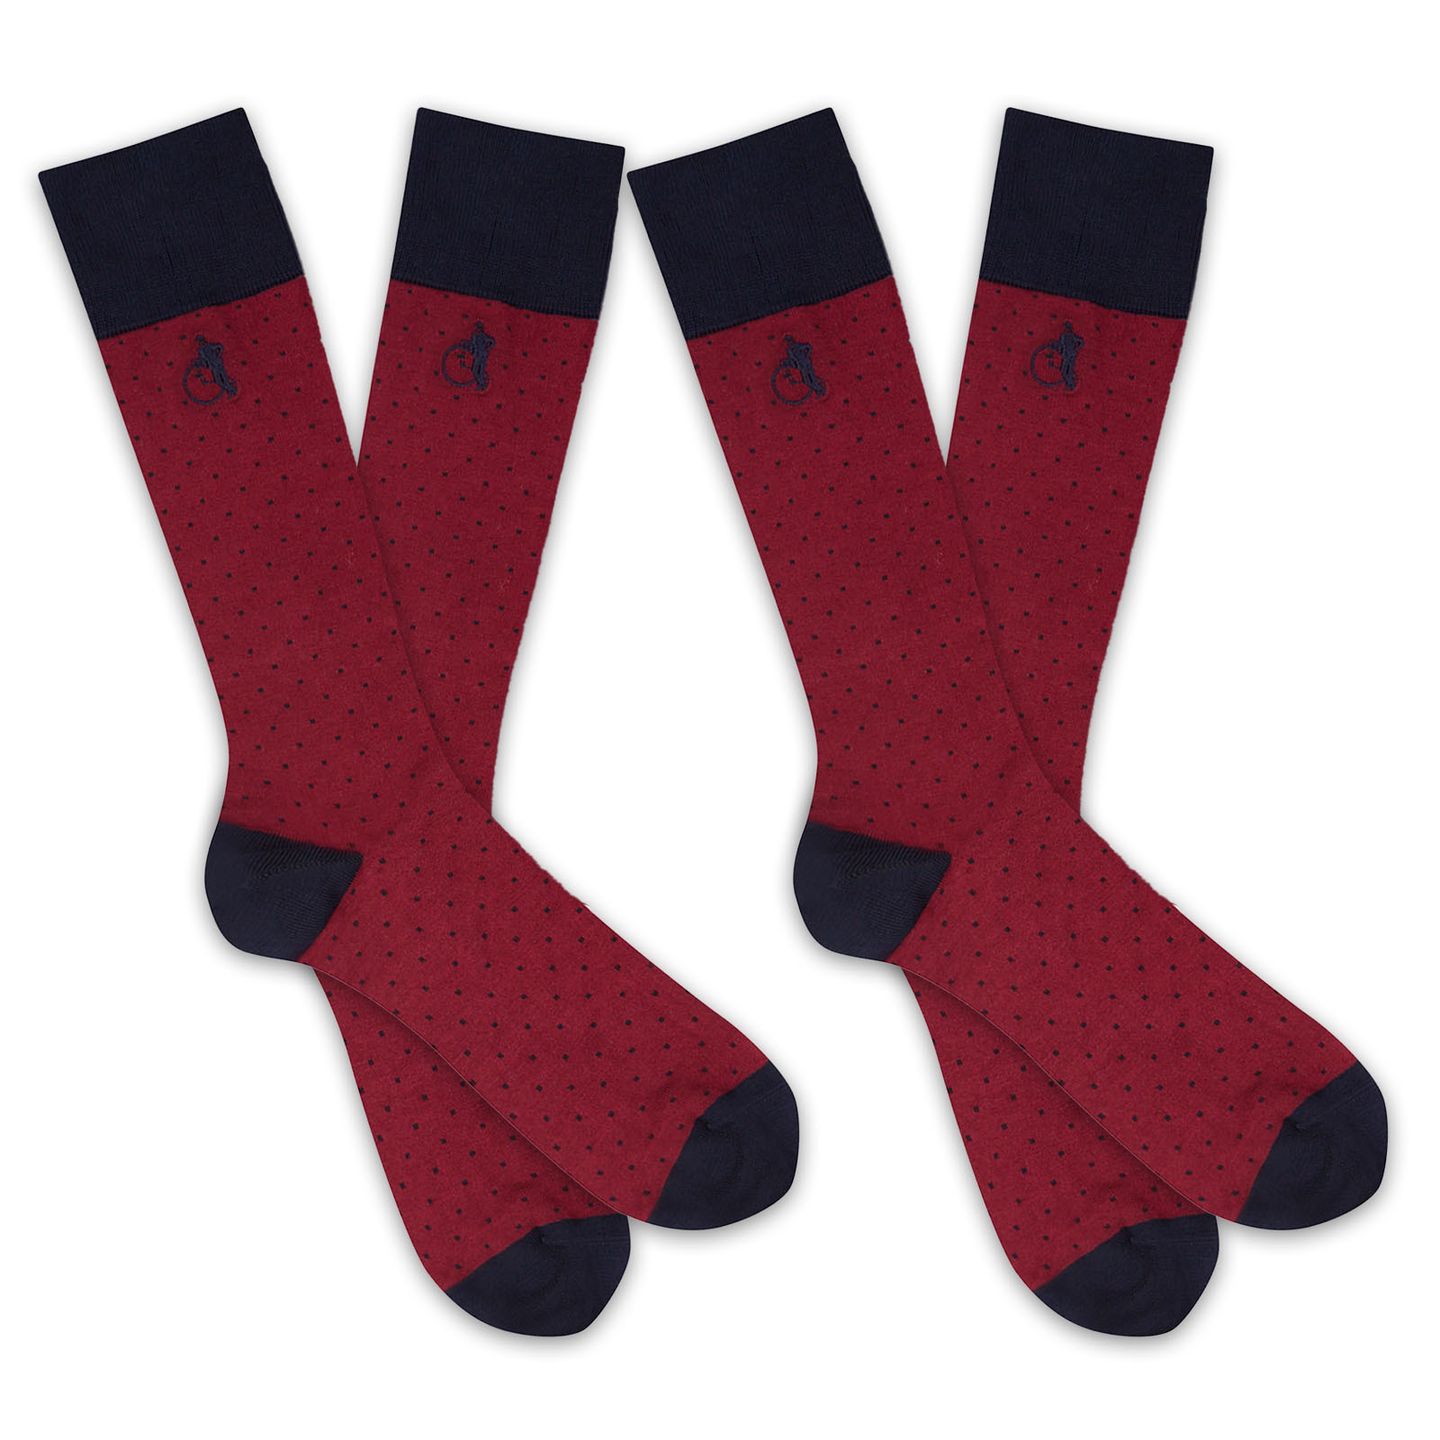 2 pair of red socks with blue dots on them with a white background